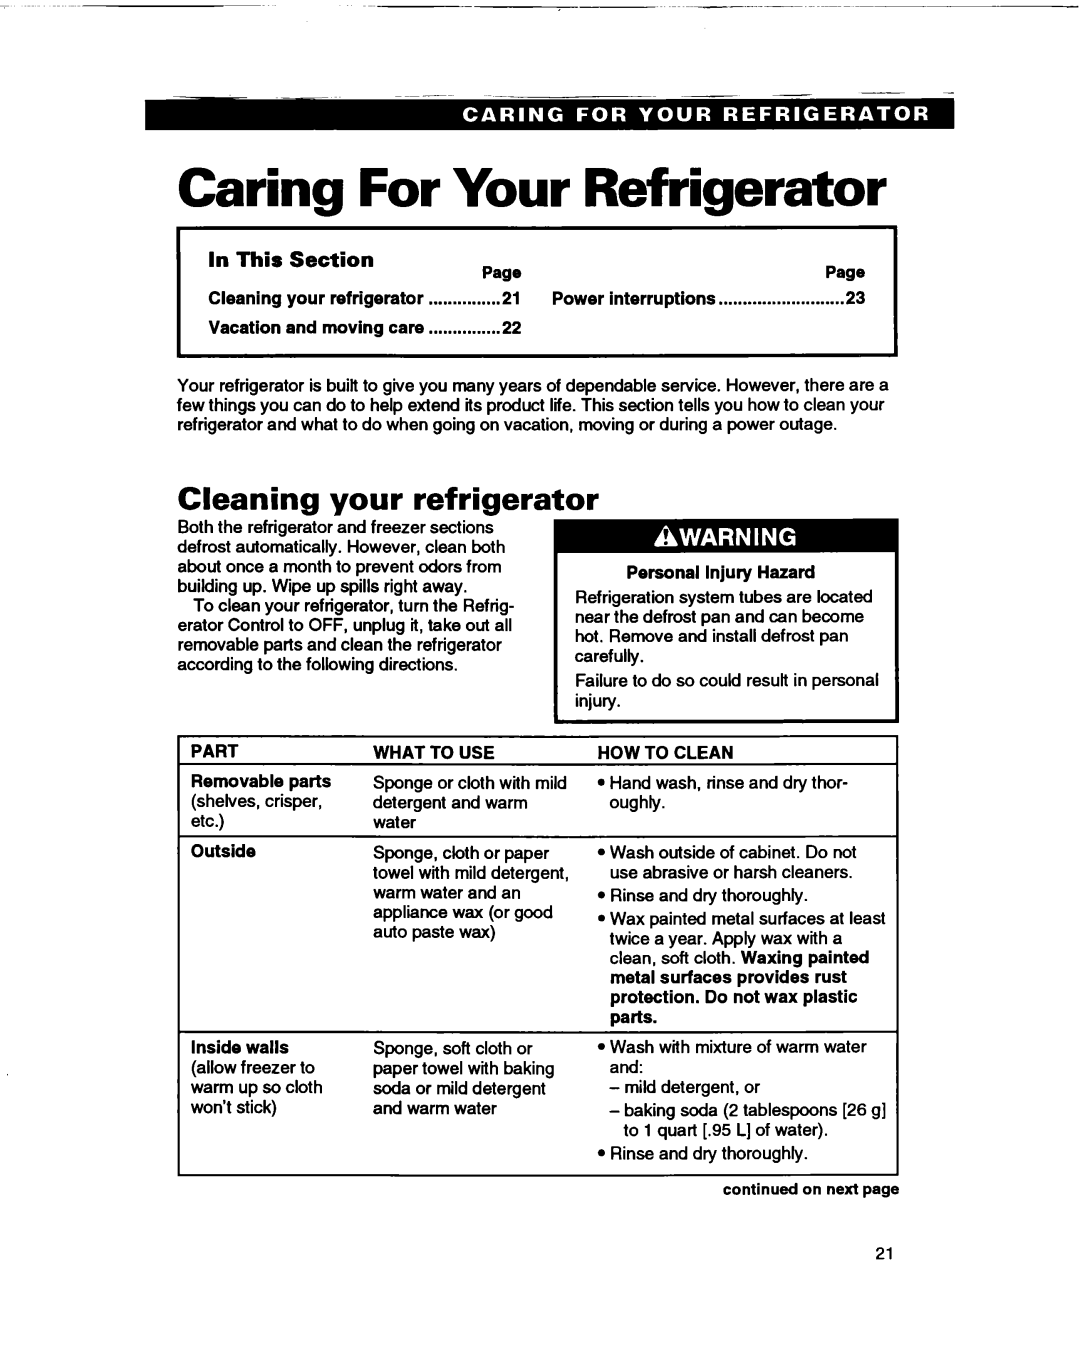 Whirlpool ED22DL Caring For Your Refrigerator, Cleaning your refrigerator, Vacation, PART Removable parts, What To Use 